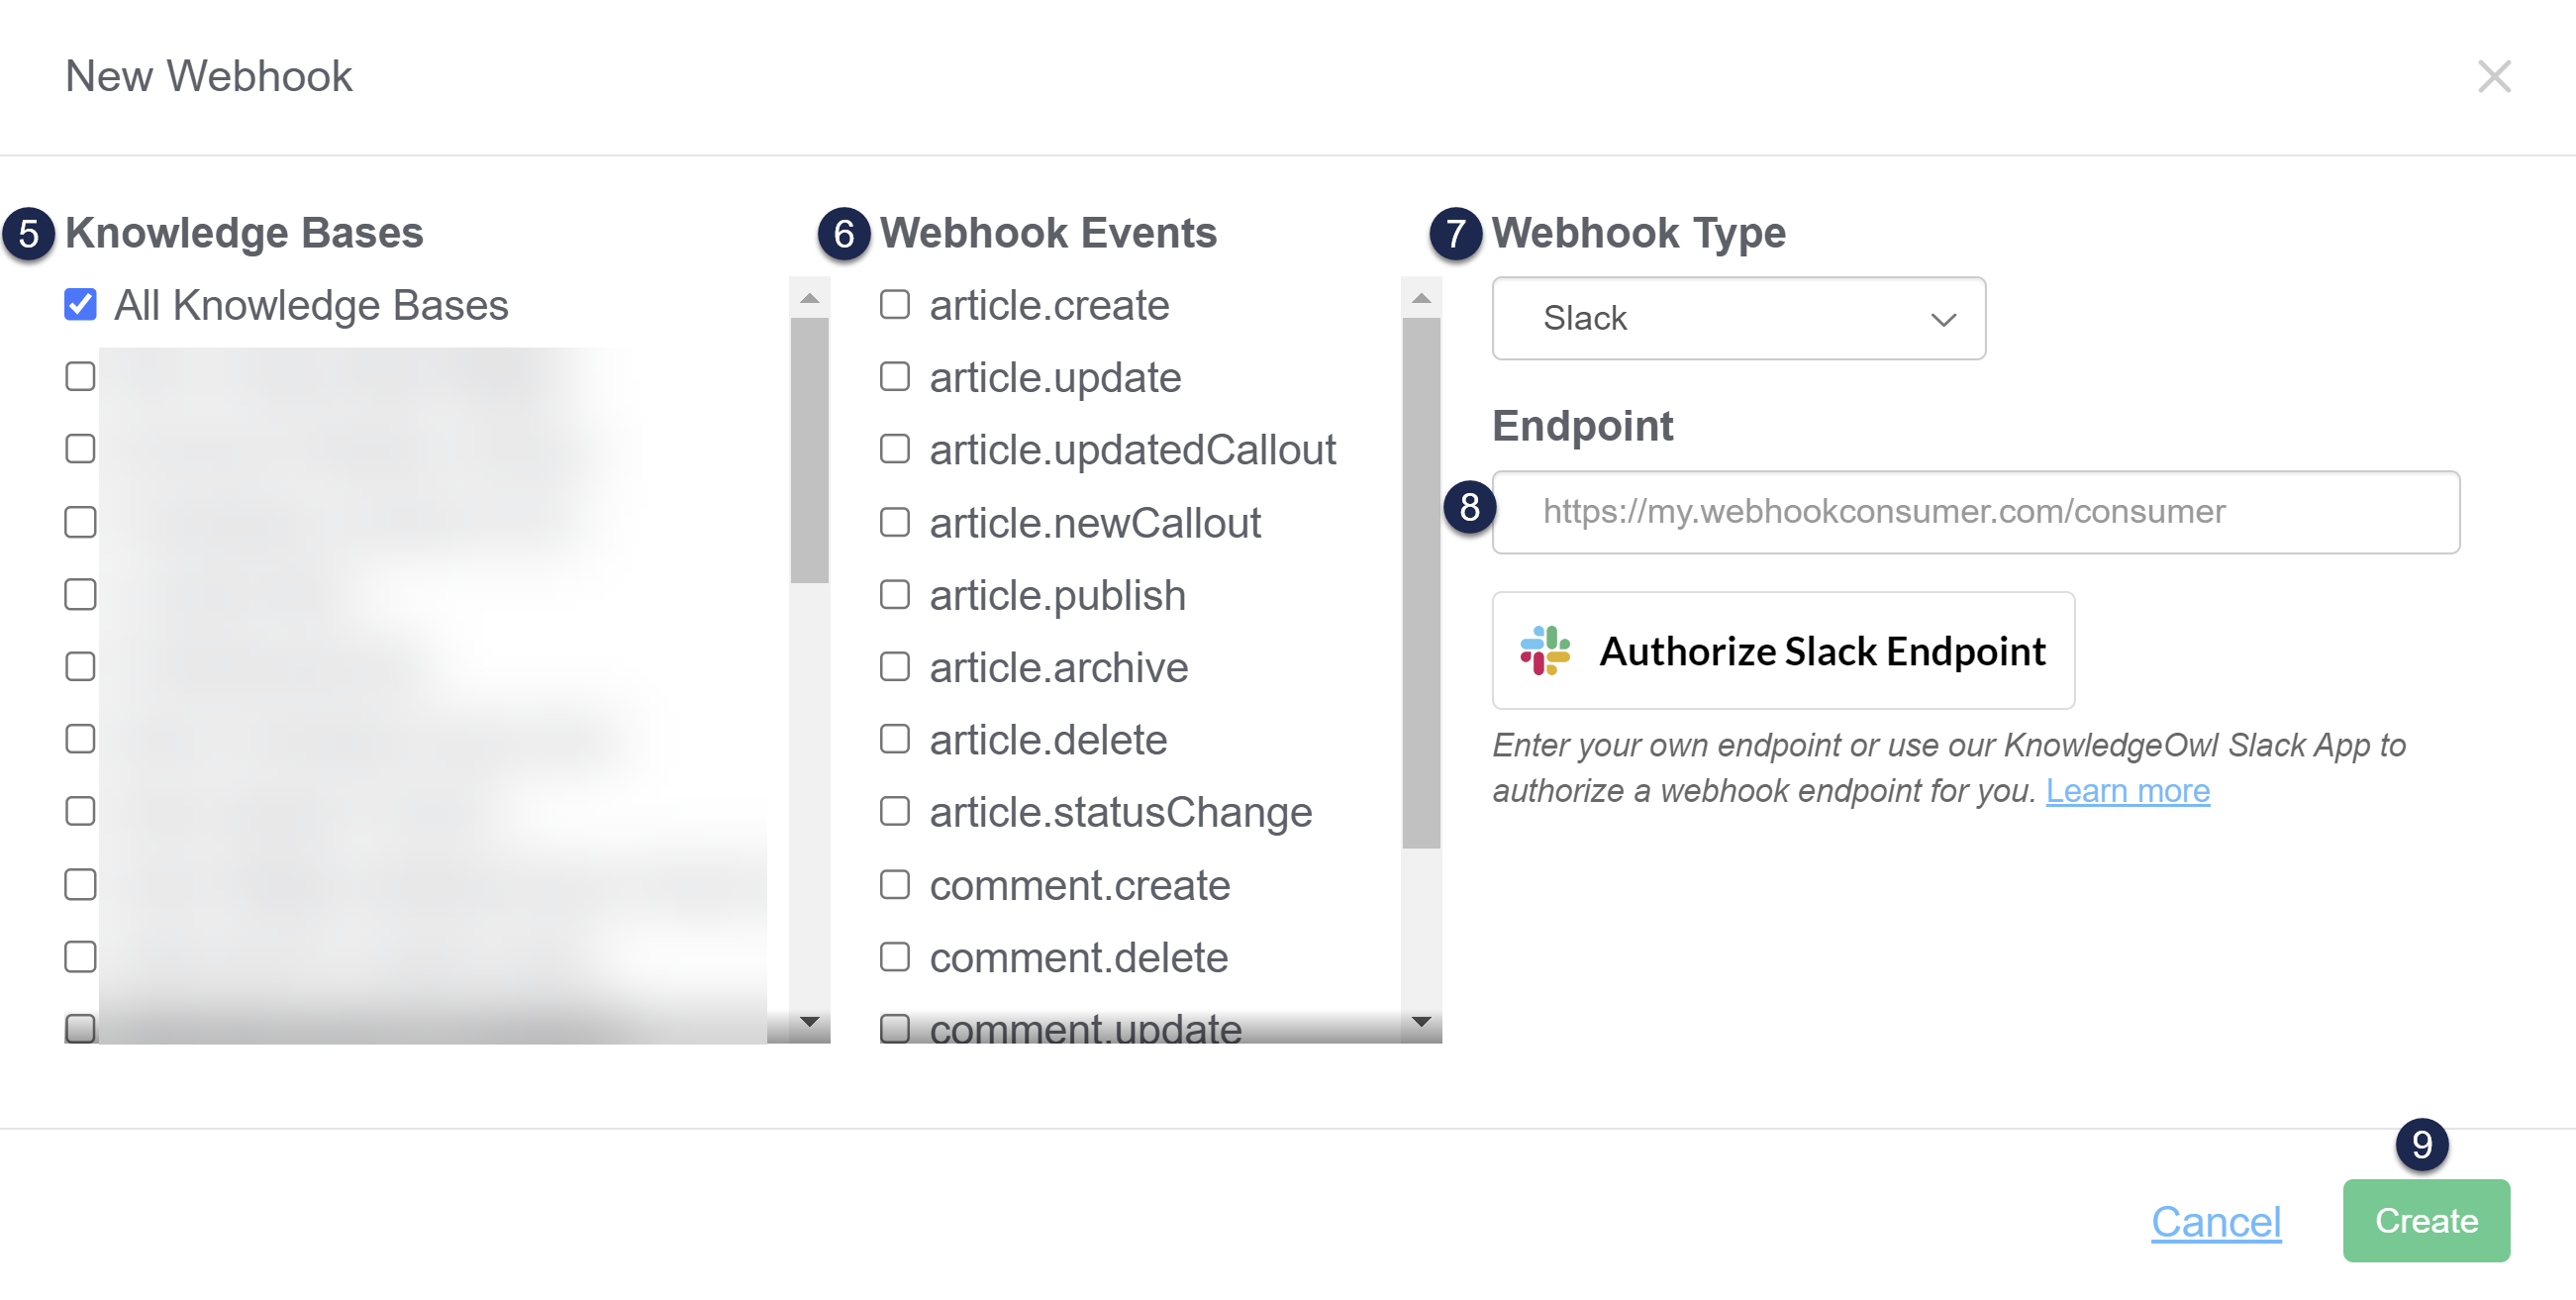 A screenshot showing the options available in the New Webhook pop-up, which lets you select All Knowledge Bases or individual knowledge bases to generate webhooks from, the webhook events you'd like to use, the Webhook Type dropdown, and an Endpoint to send the webhook's messages to